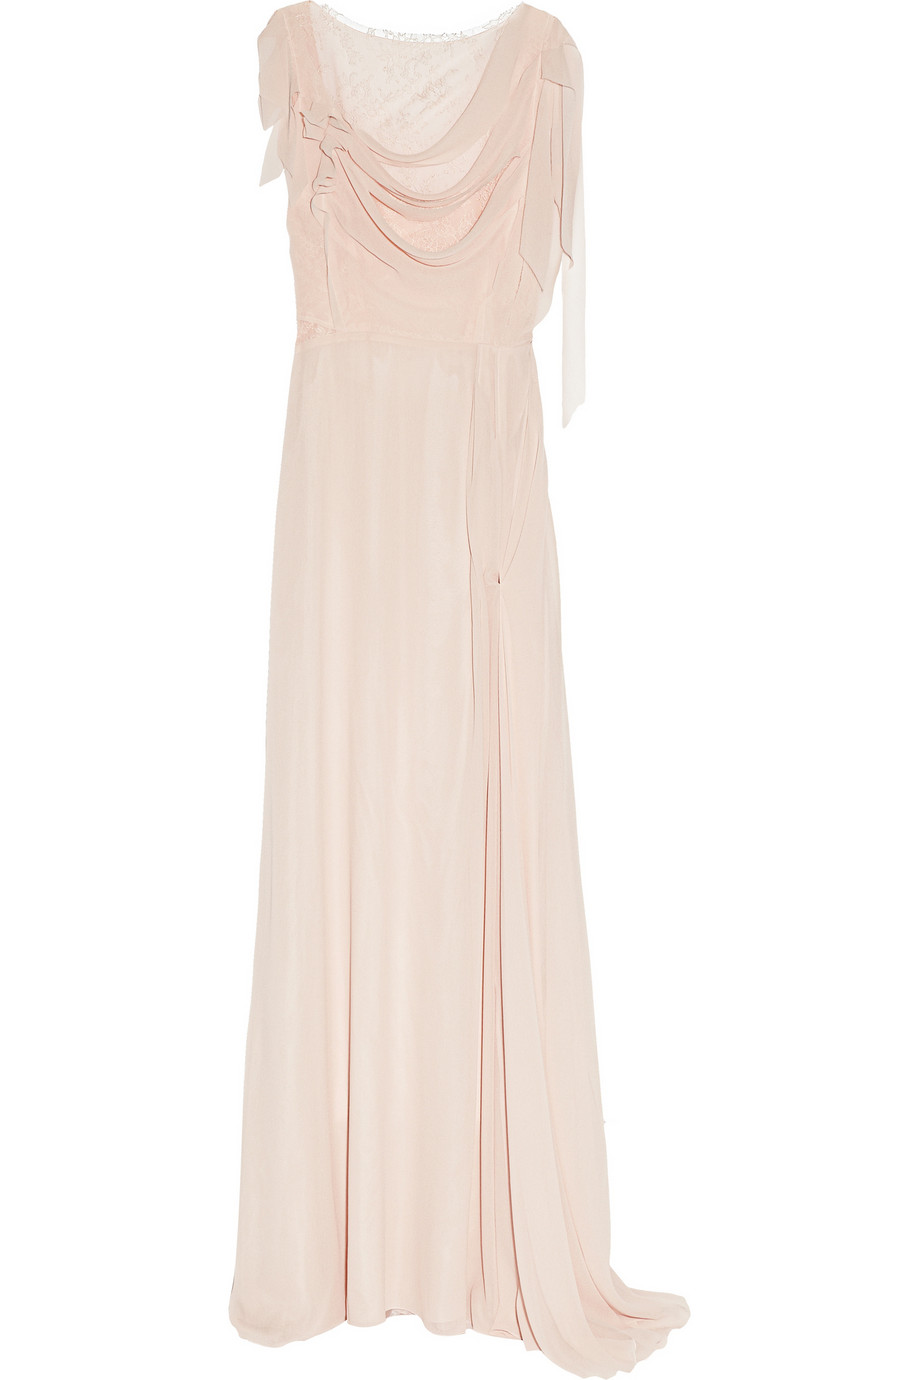 Lyst - Nina ricci Draped Chiffon and Lace Gown in Pink